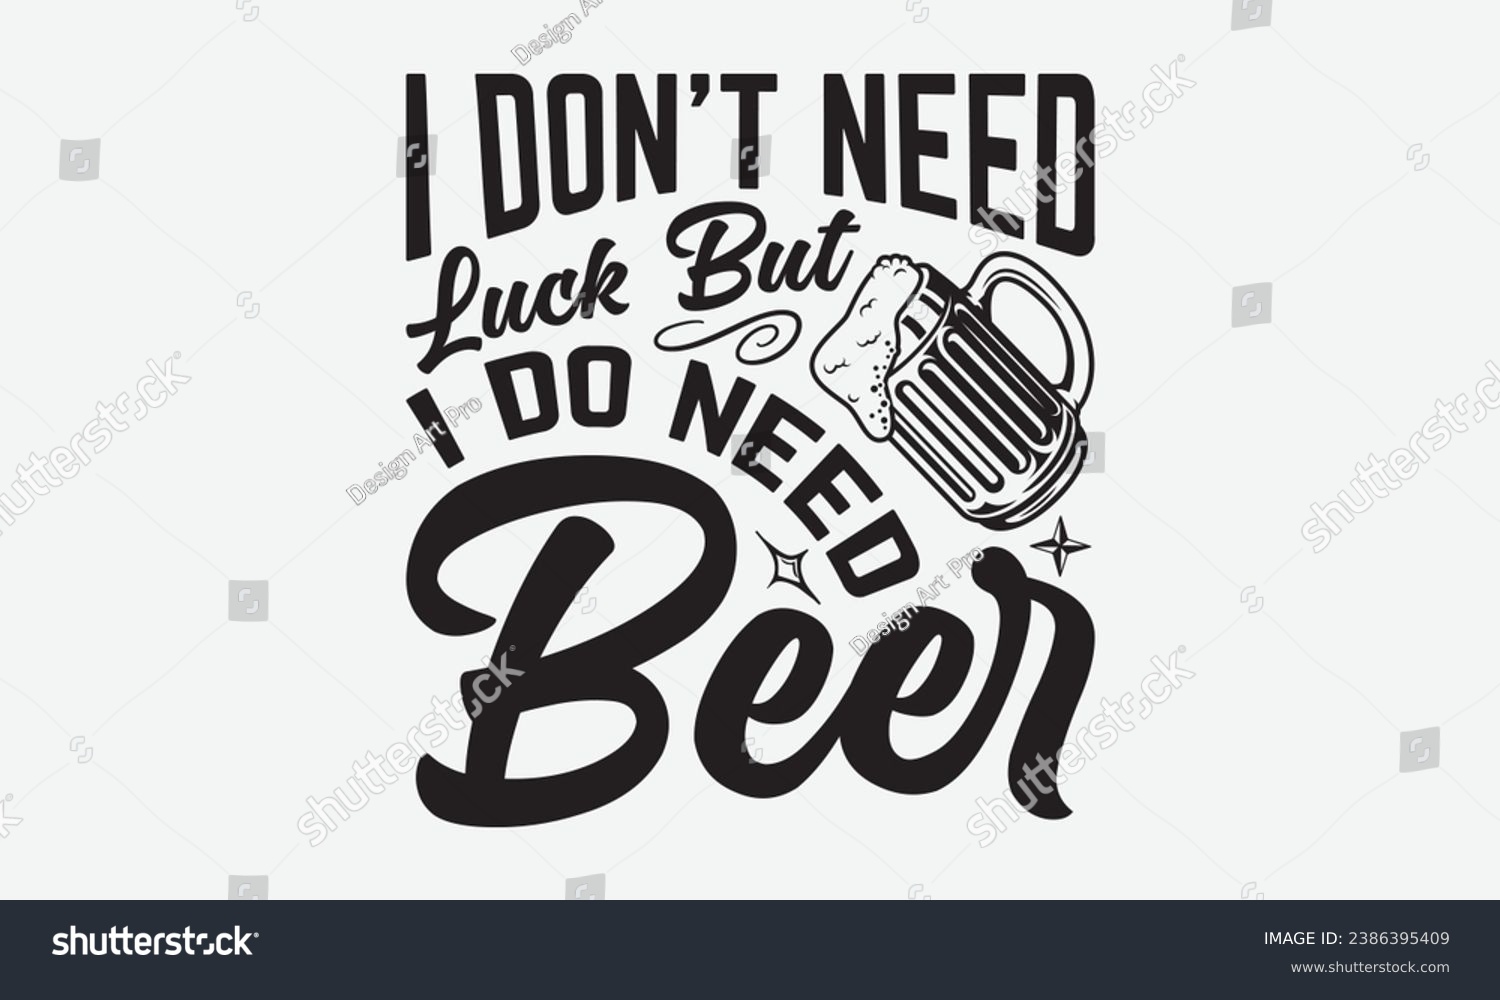 SVG of I Don’t Need Luck But I Do Need Beer -Beer T-Shirt Design, Handmade Calligraphy Vector Illustration, For Wall, Mugs, Cutting Machine, Silhouette Cameo, Cricut. svg